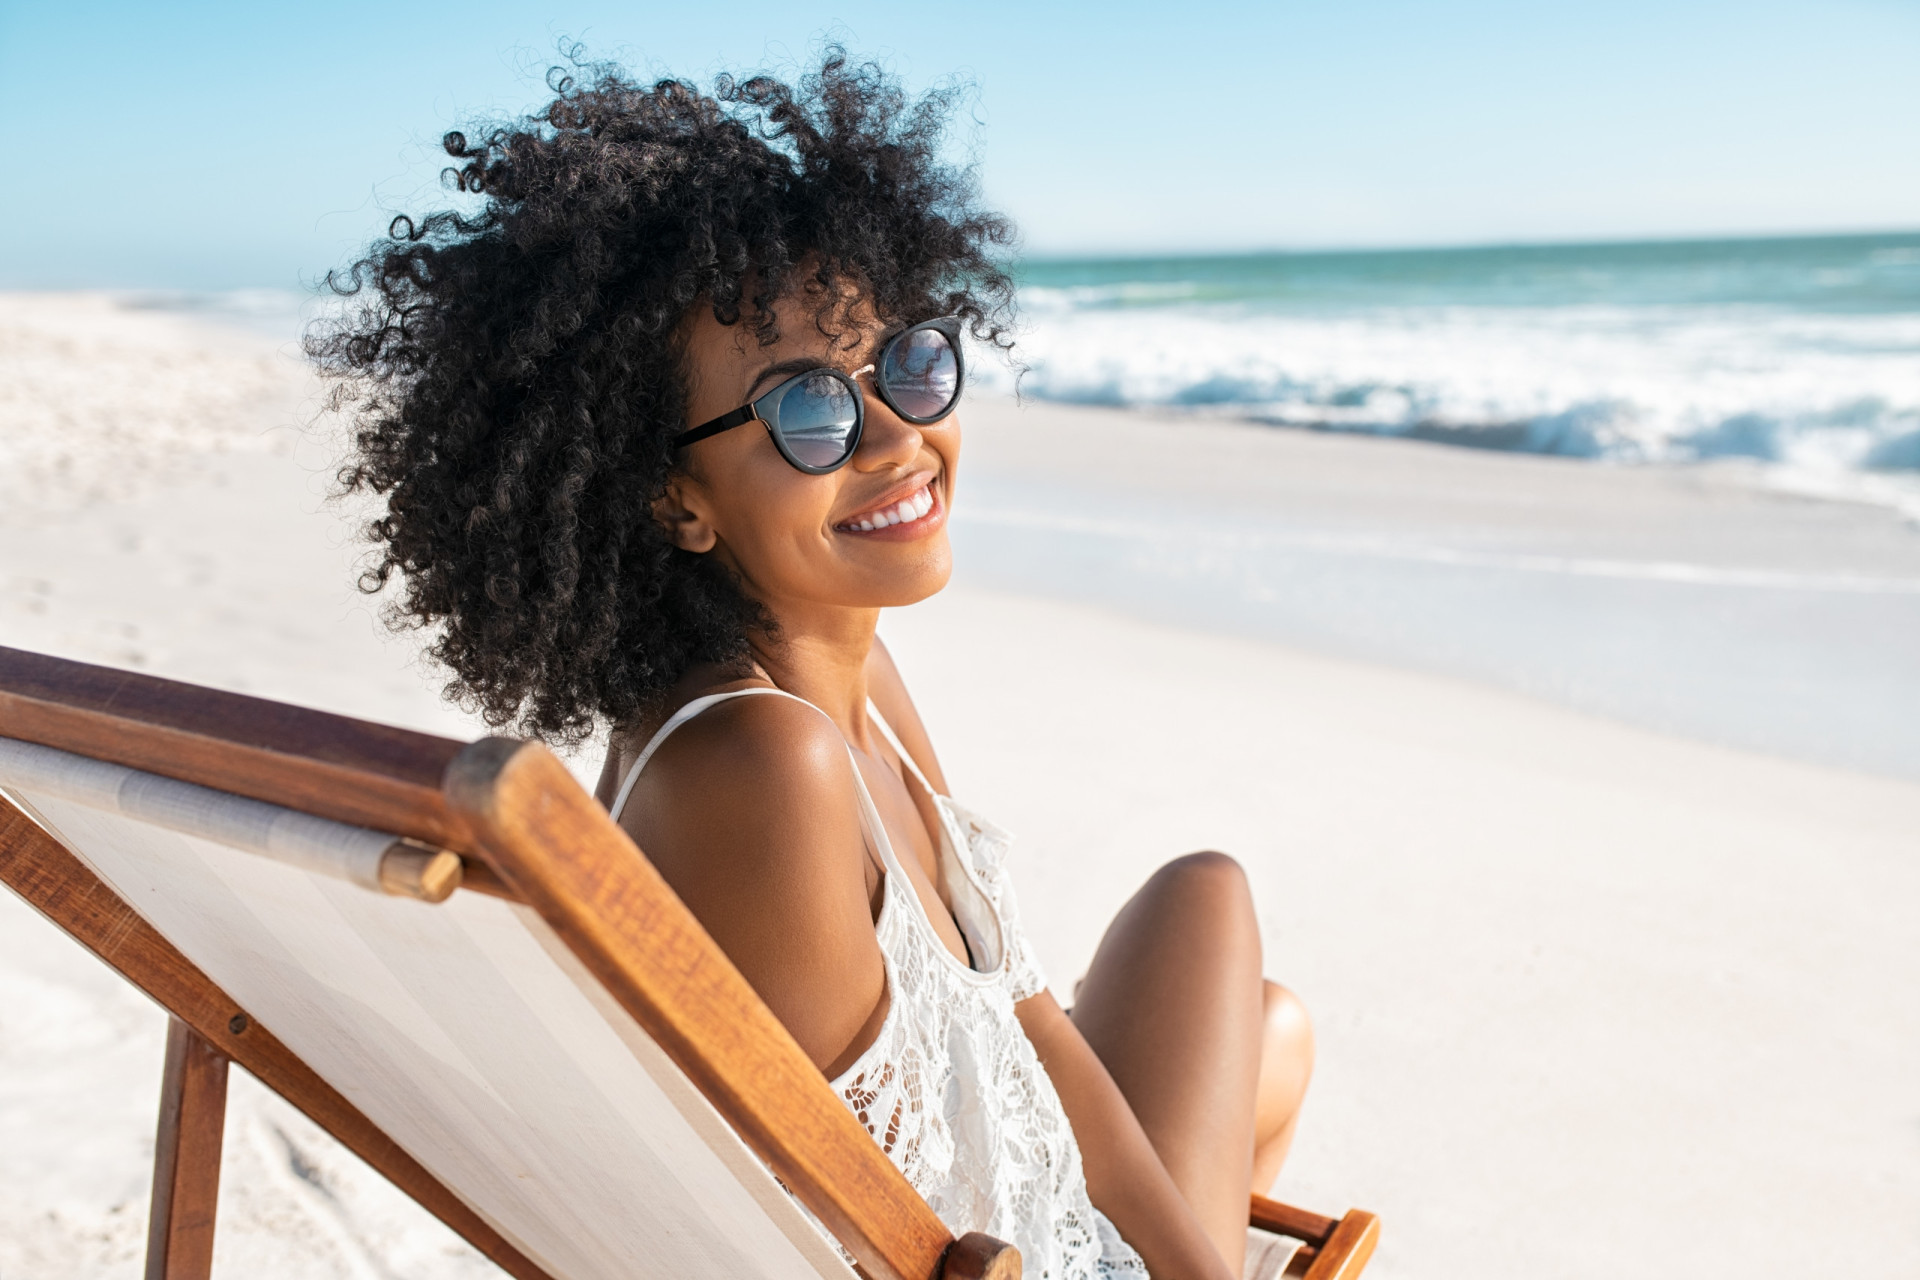 <p>Ultraviolet rays are best combated by a good pair of sunglasses and a healthy coating of sunscreen. To avoid the chances of developing an eye or skin condition, make sure you always have these tools handy when you head to the beach.</p><p>You may also like:<a href="https://www.starsinsider.com/n/481753?utm_source=msn.com&utm_medium=display&utm_campaign=referral_description&utm_content=550315en-us"> The beautiful Brazilian island with a terrifying backstory</a></p>